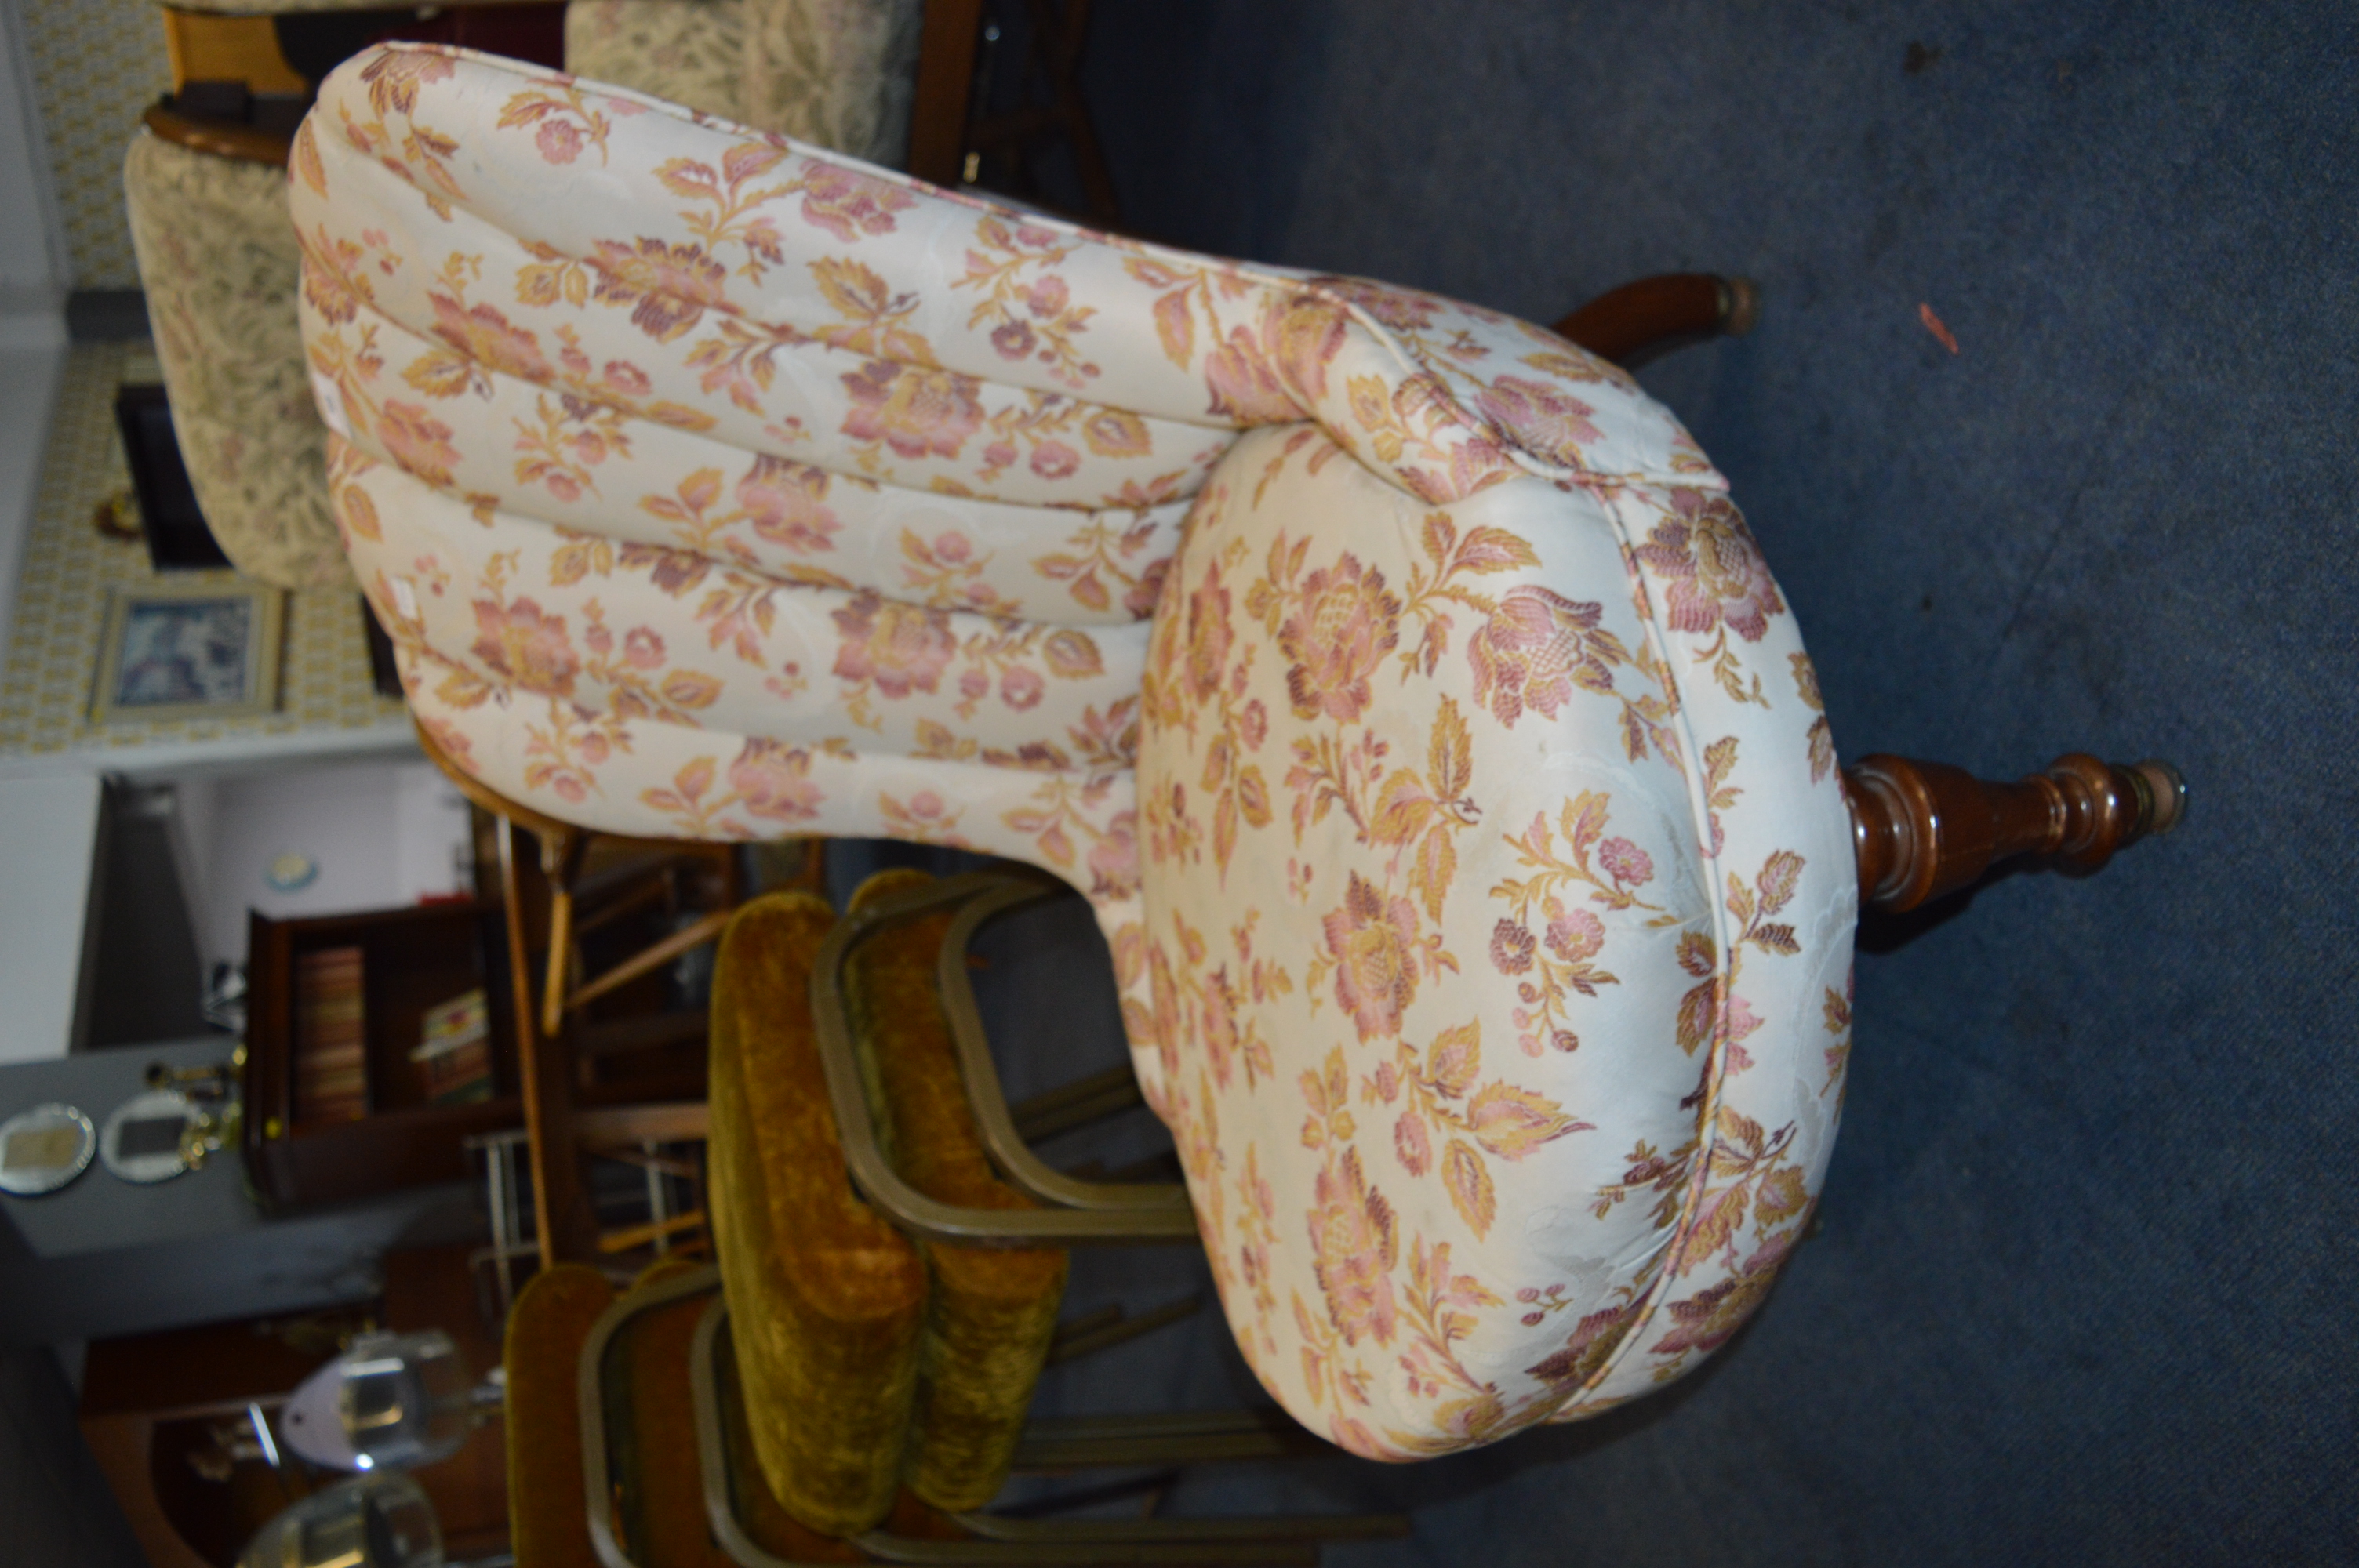 Victorian Nursing Chair with Floral Upholstery - Image 3 of 4